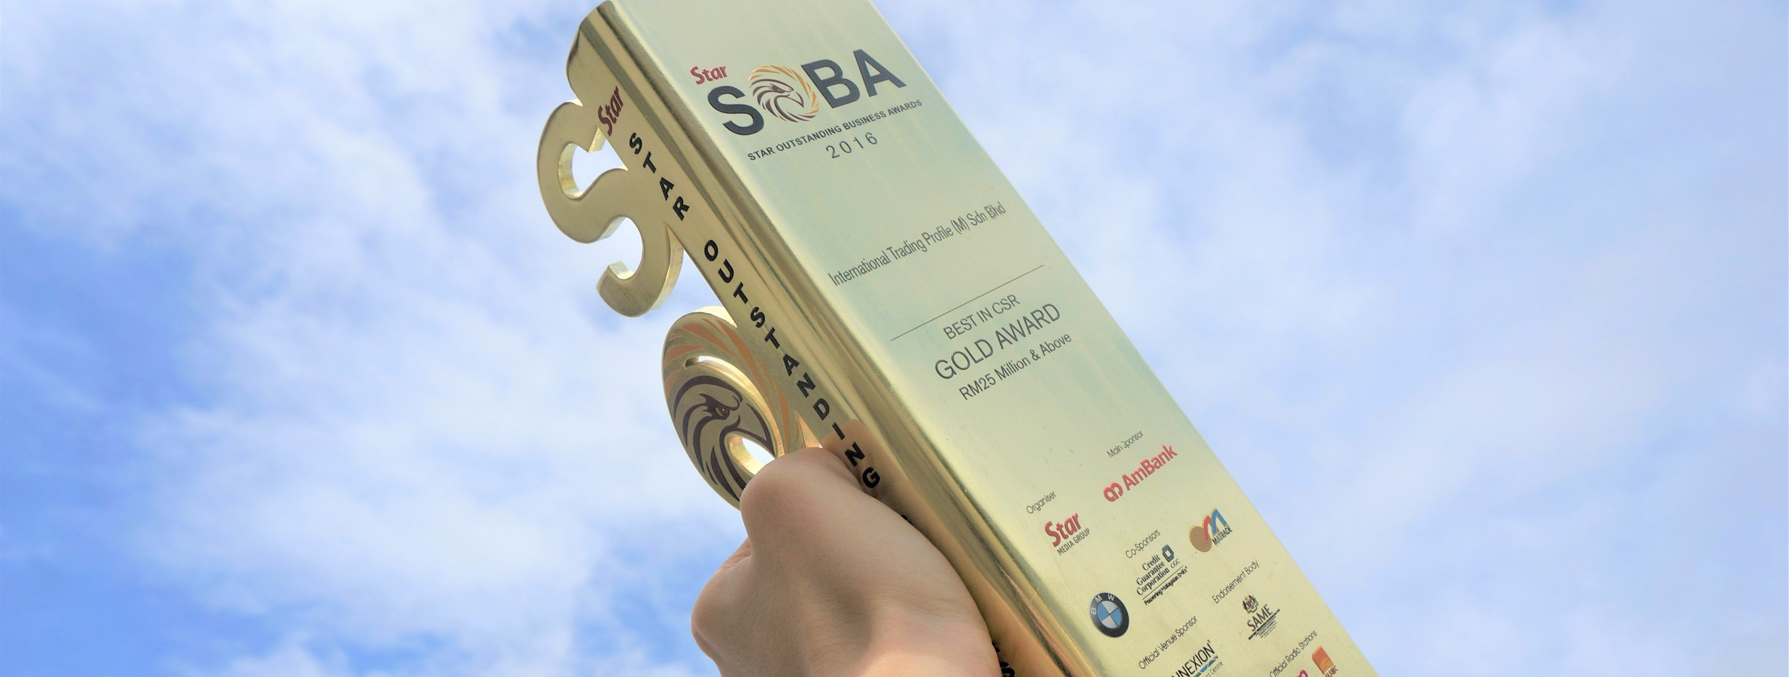 ITP is rewarded with Gold Award in Best CSR by SOBA Awards (17 Jan 2017)